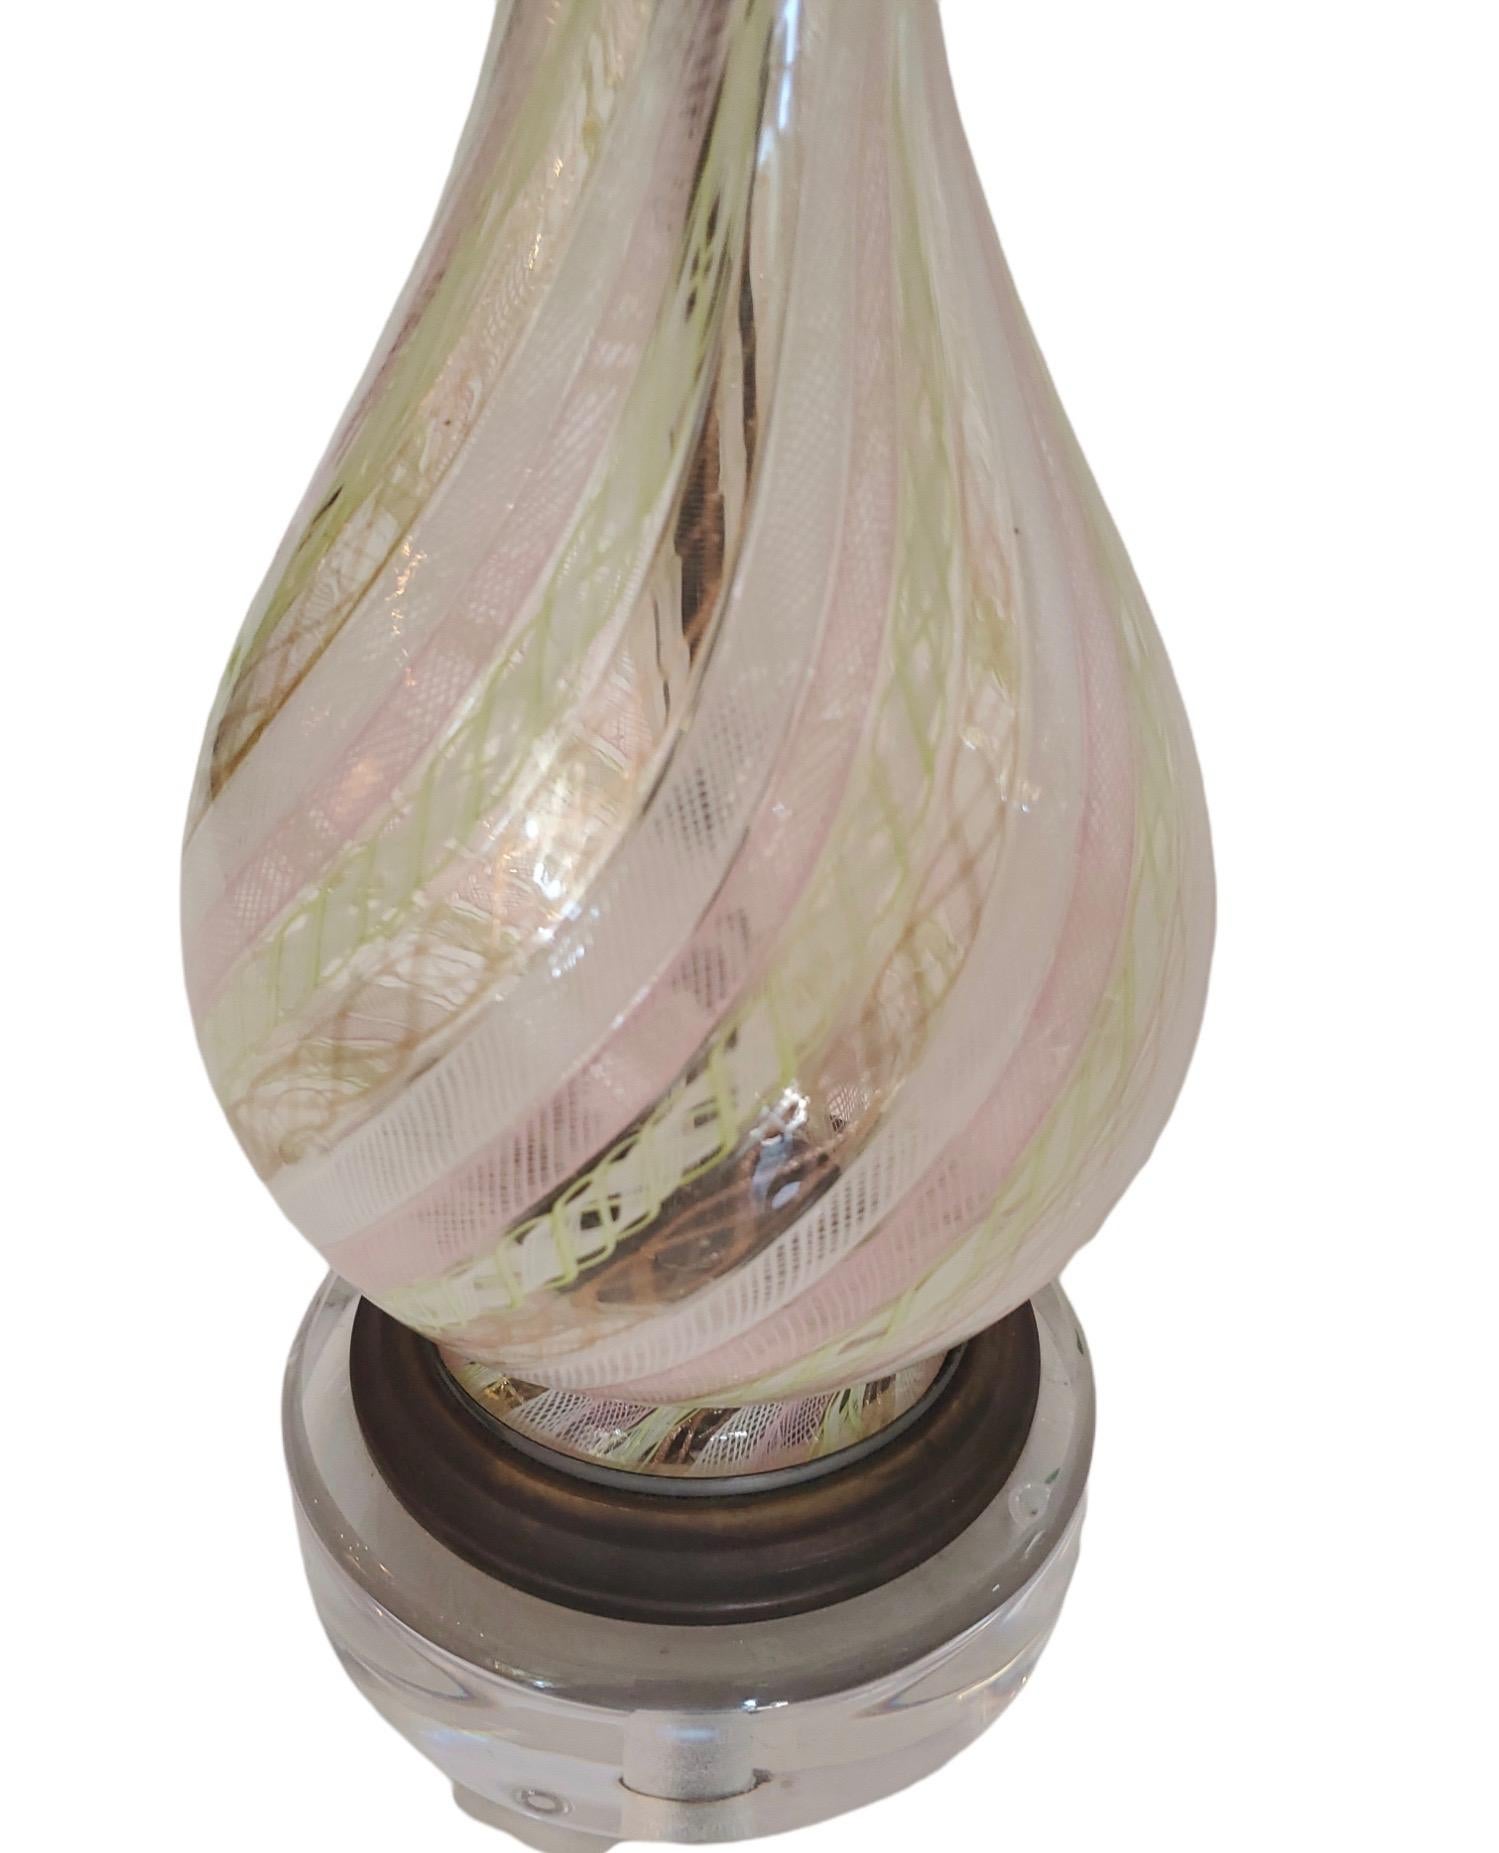 Pair of newly-wired Murano glass lamps with custom lucite base and hand crafted parchment shade. Unusual lime green with soft pink and copper flex running throughout.